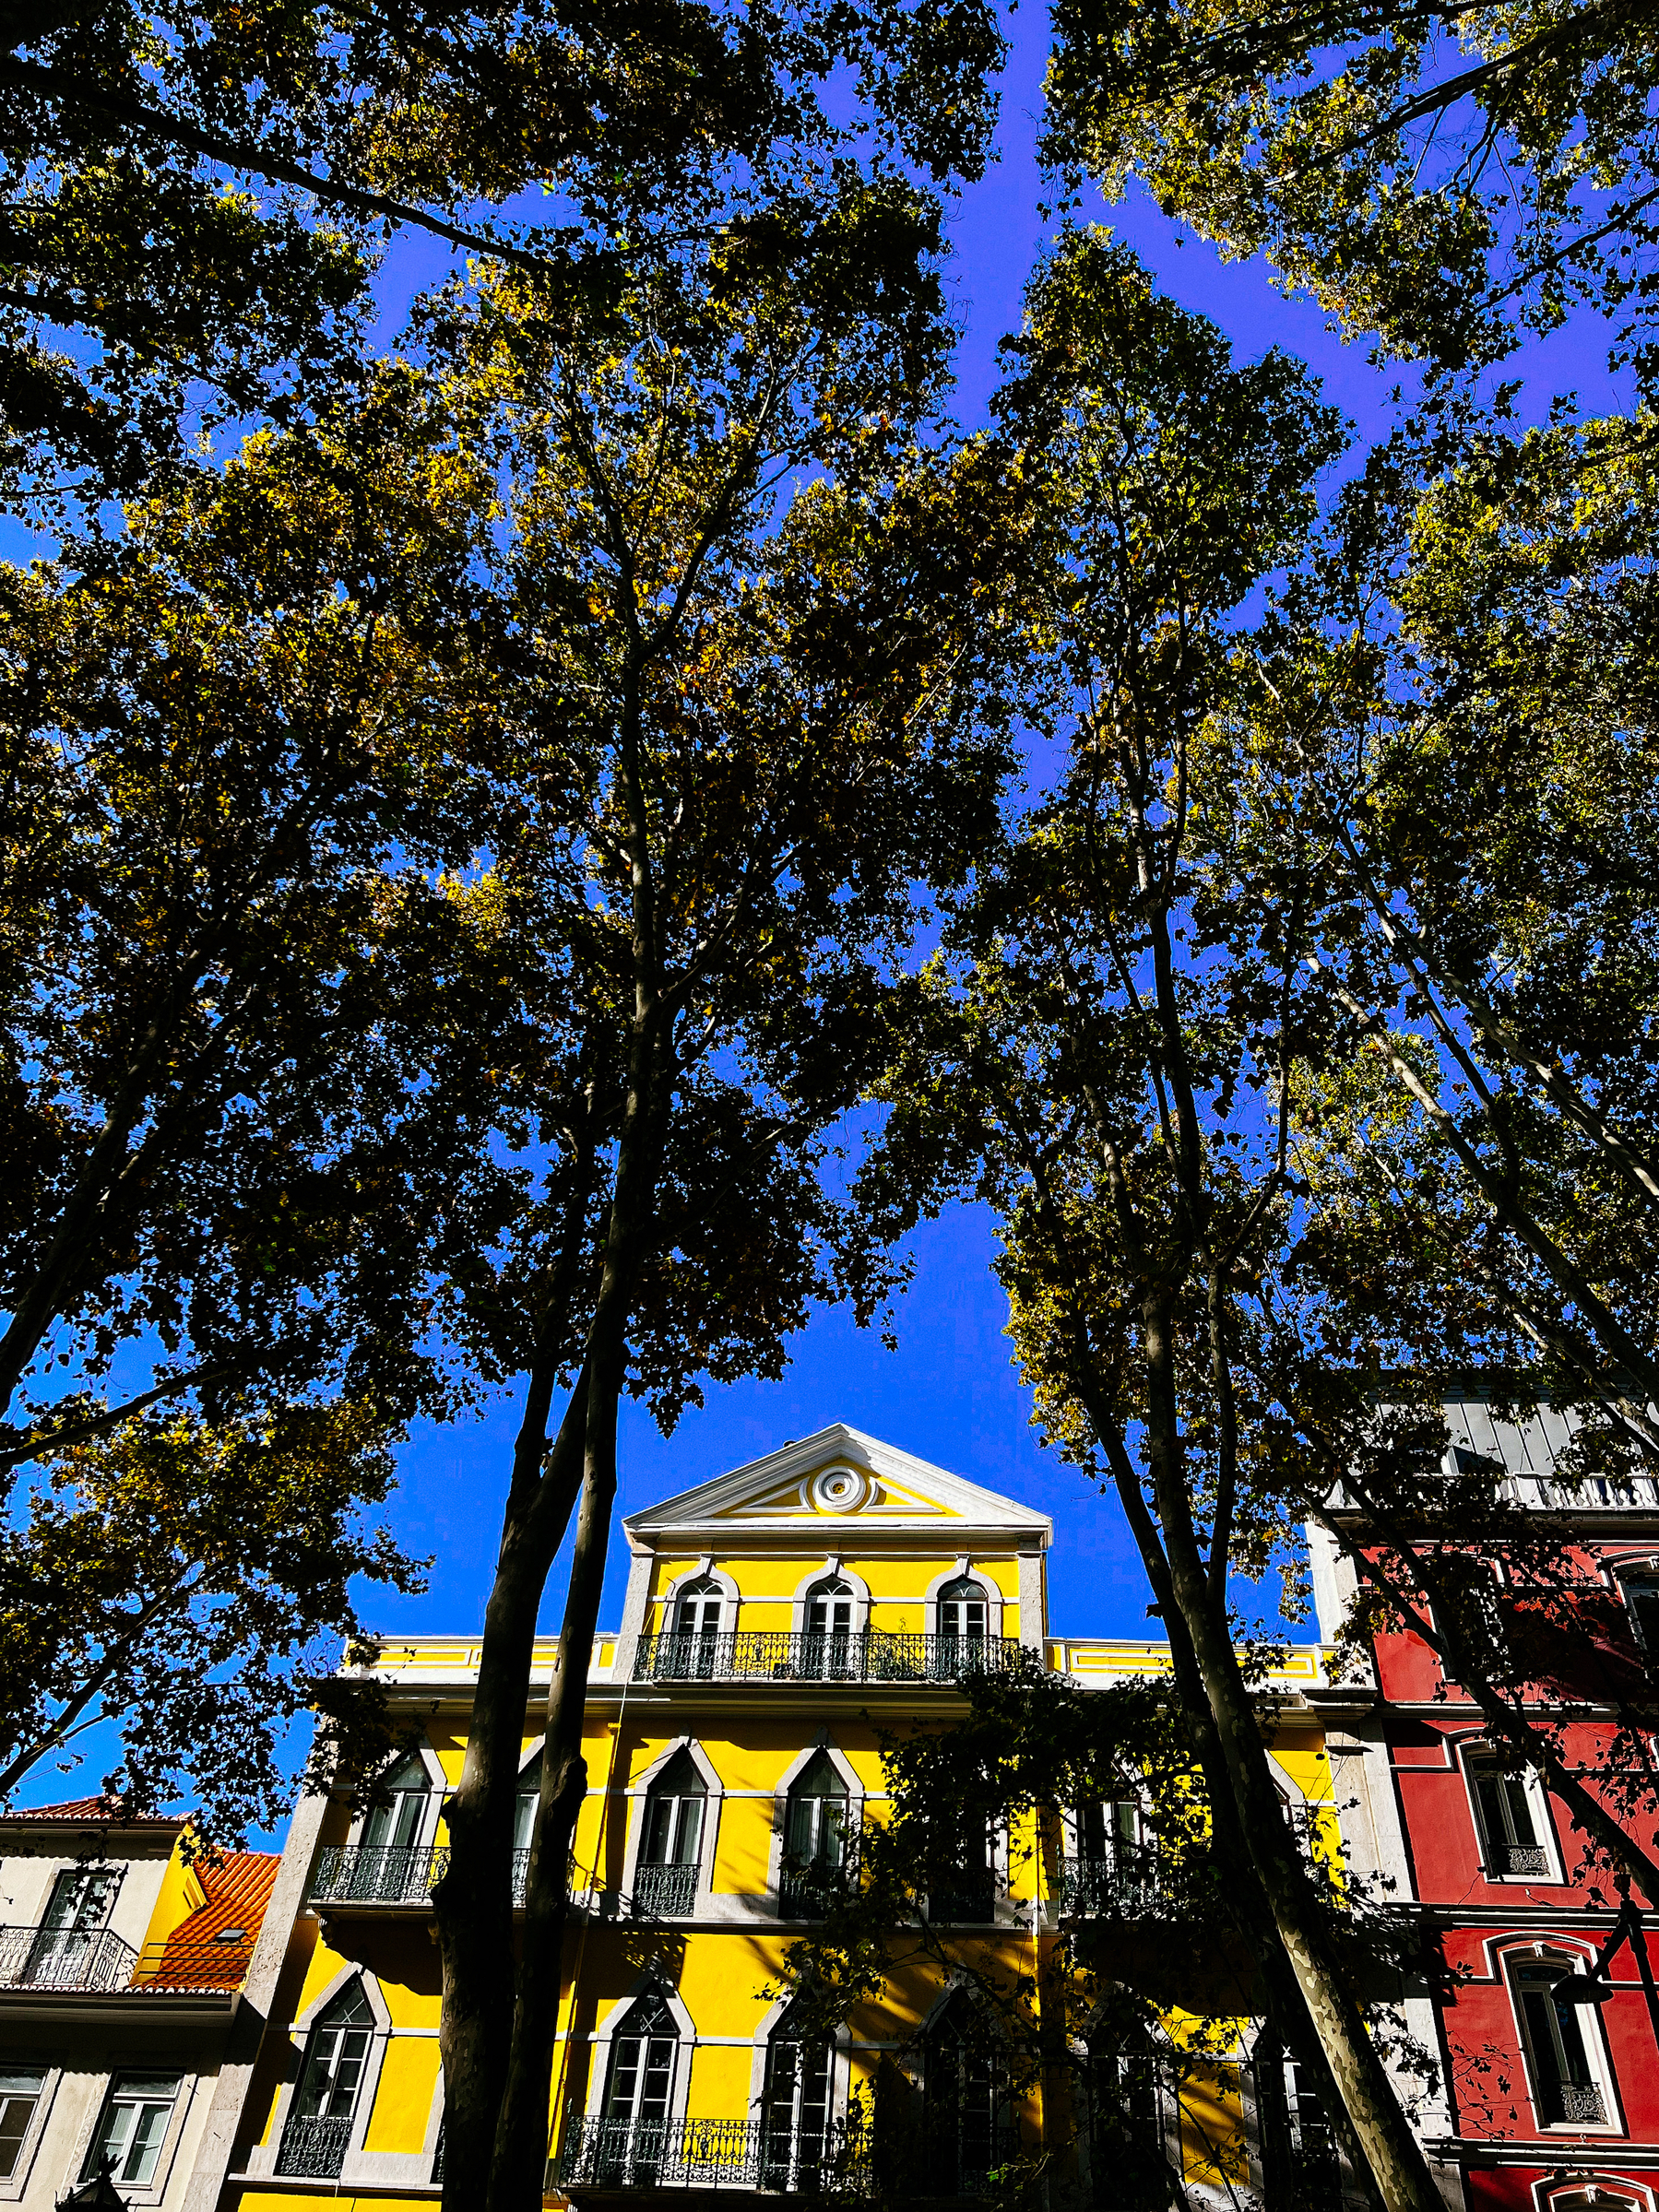 Looking up, a yellow house and a lot of trees 